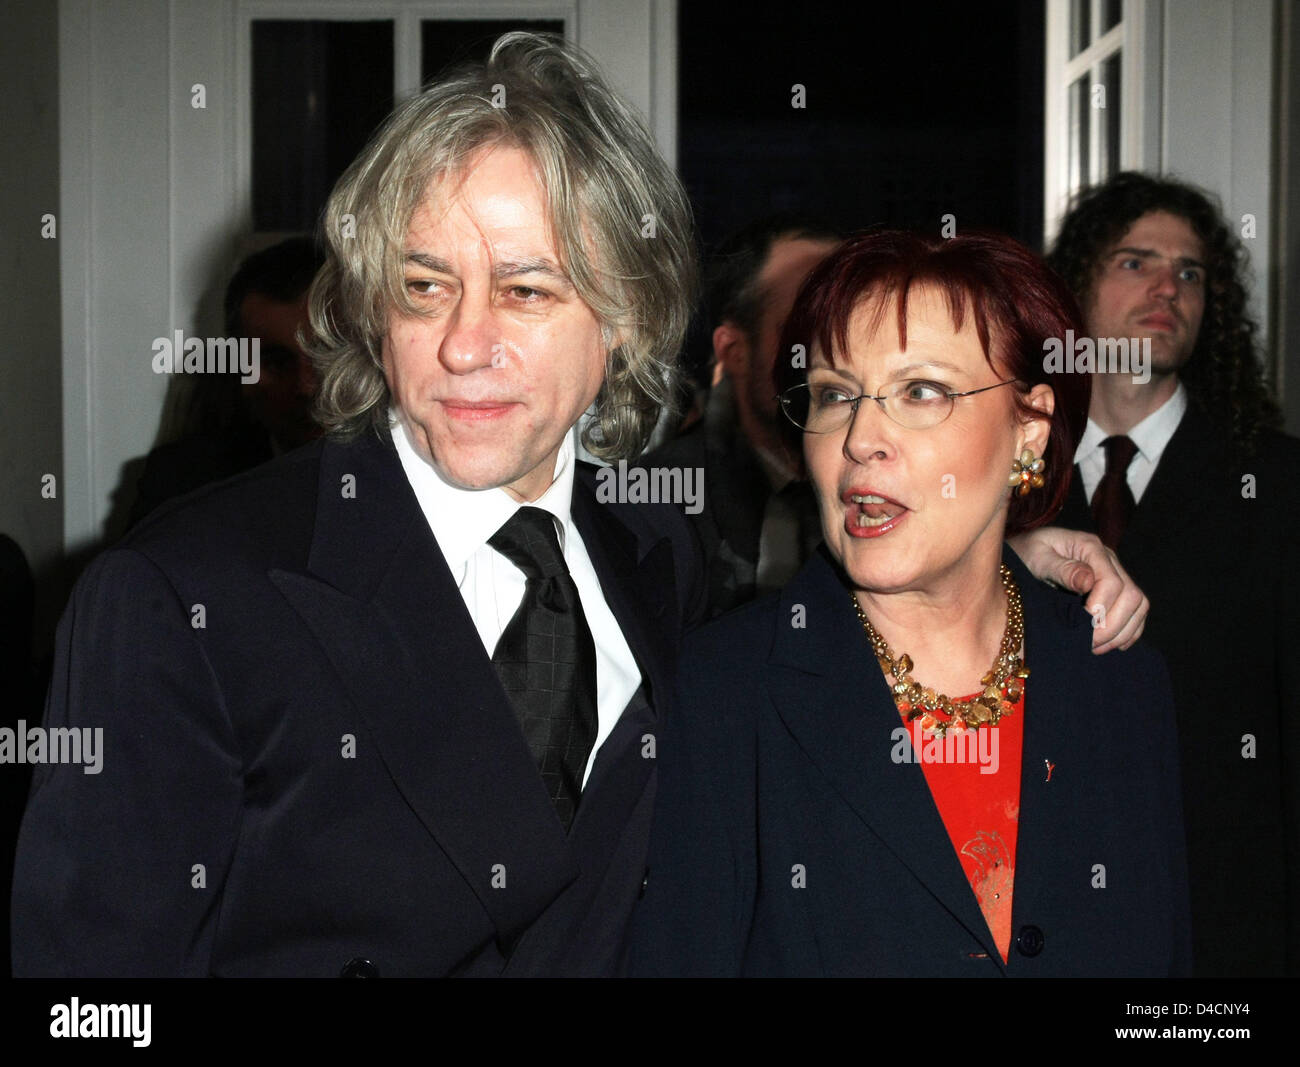 German Minister for Development Heidemarie Wieczorek-Zeul (R) and Irish musician and activist Bob Geldof (L) pose for a photo at the charity gala 'Cinema for Peace' in Berlin, Germany, 11 February 2008. The annual charity event takes place in the course of the 58th Berlinale. Photo: Soeren Stache Stock Photo